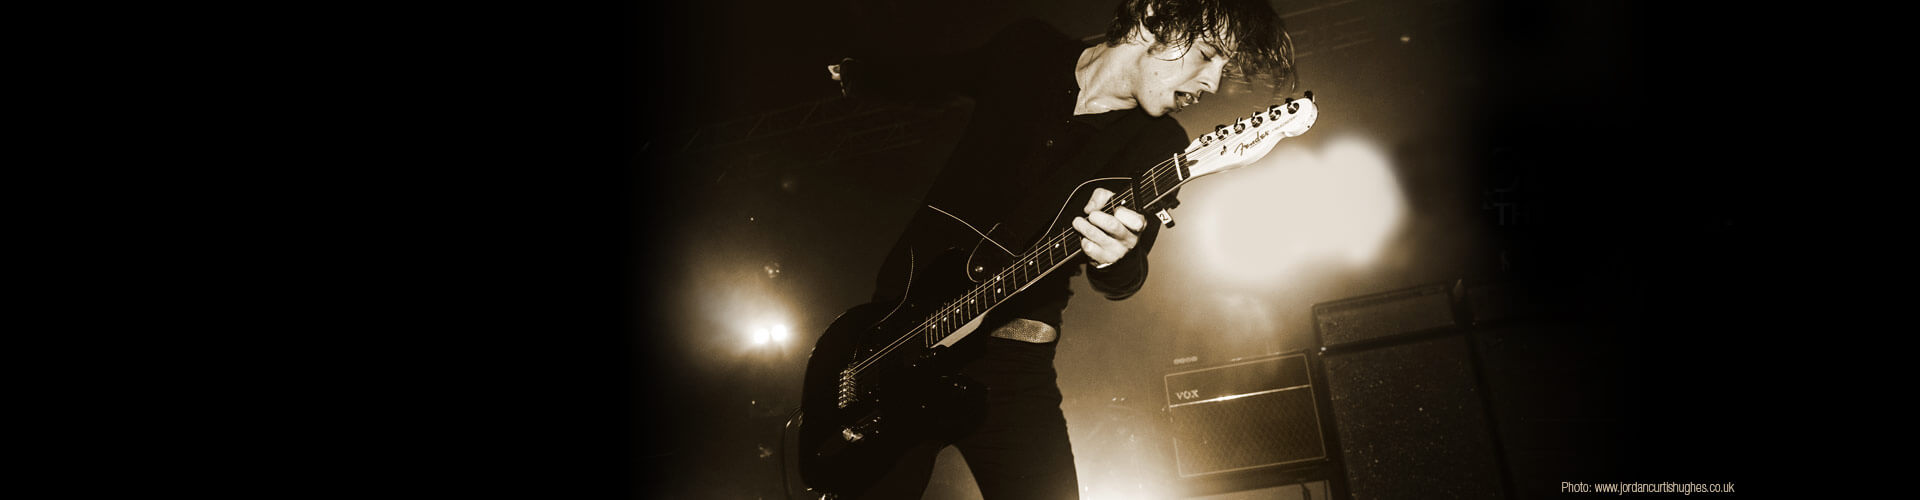 black and white pictire of artist, Van McCann, in concert playing electric guitar